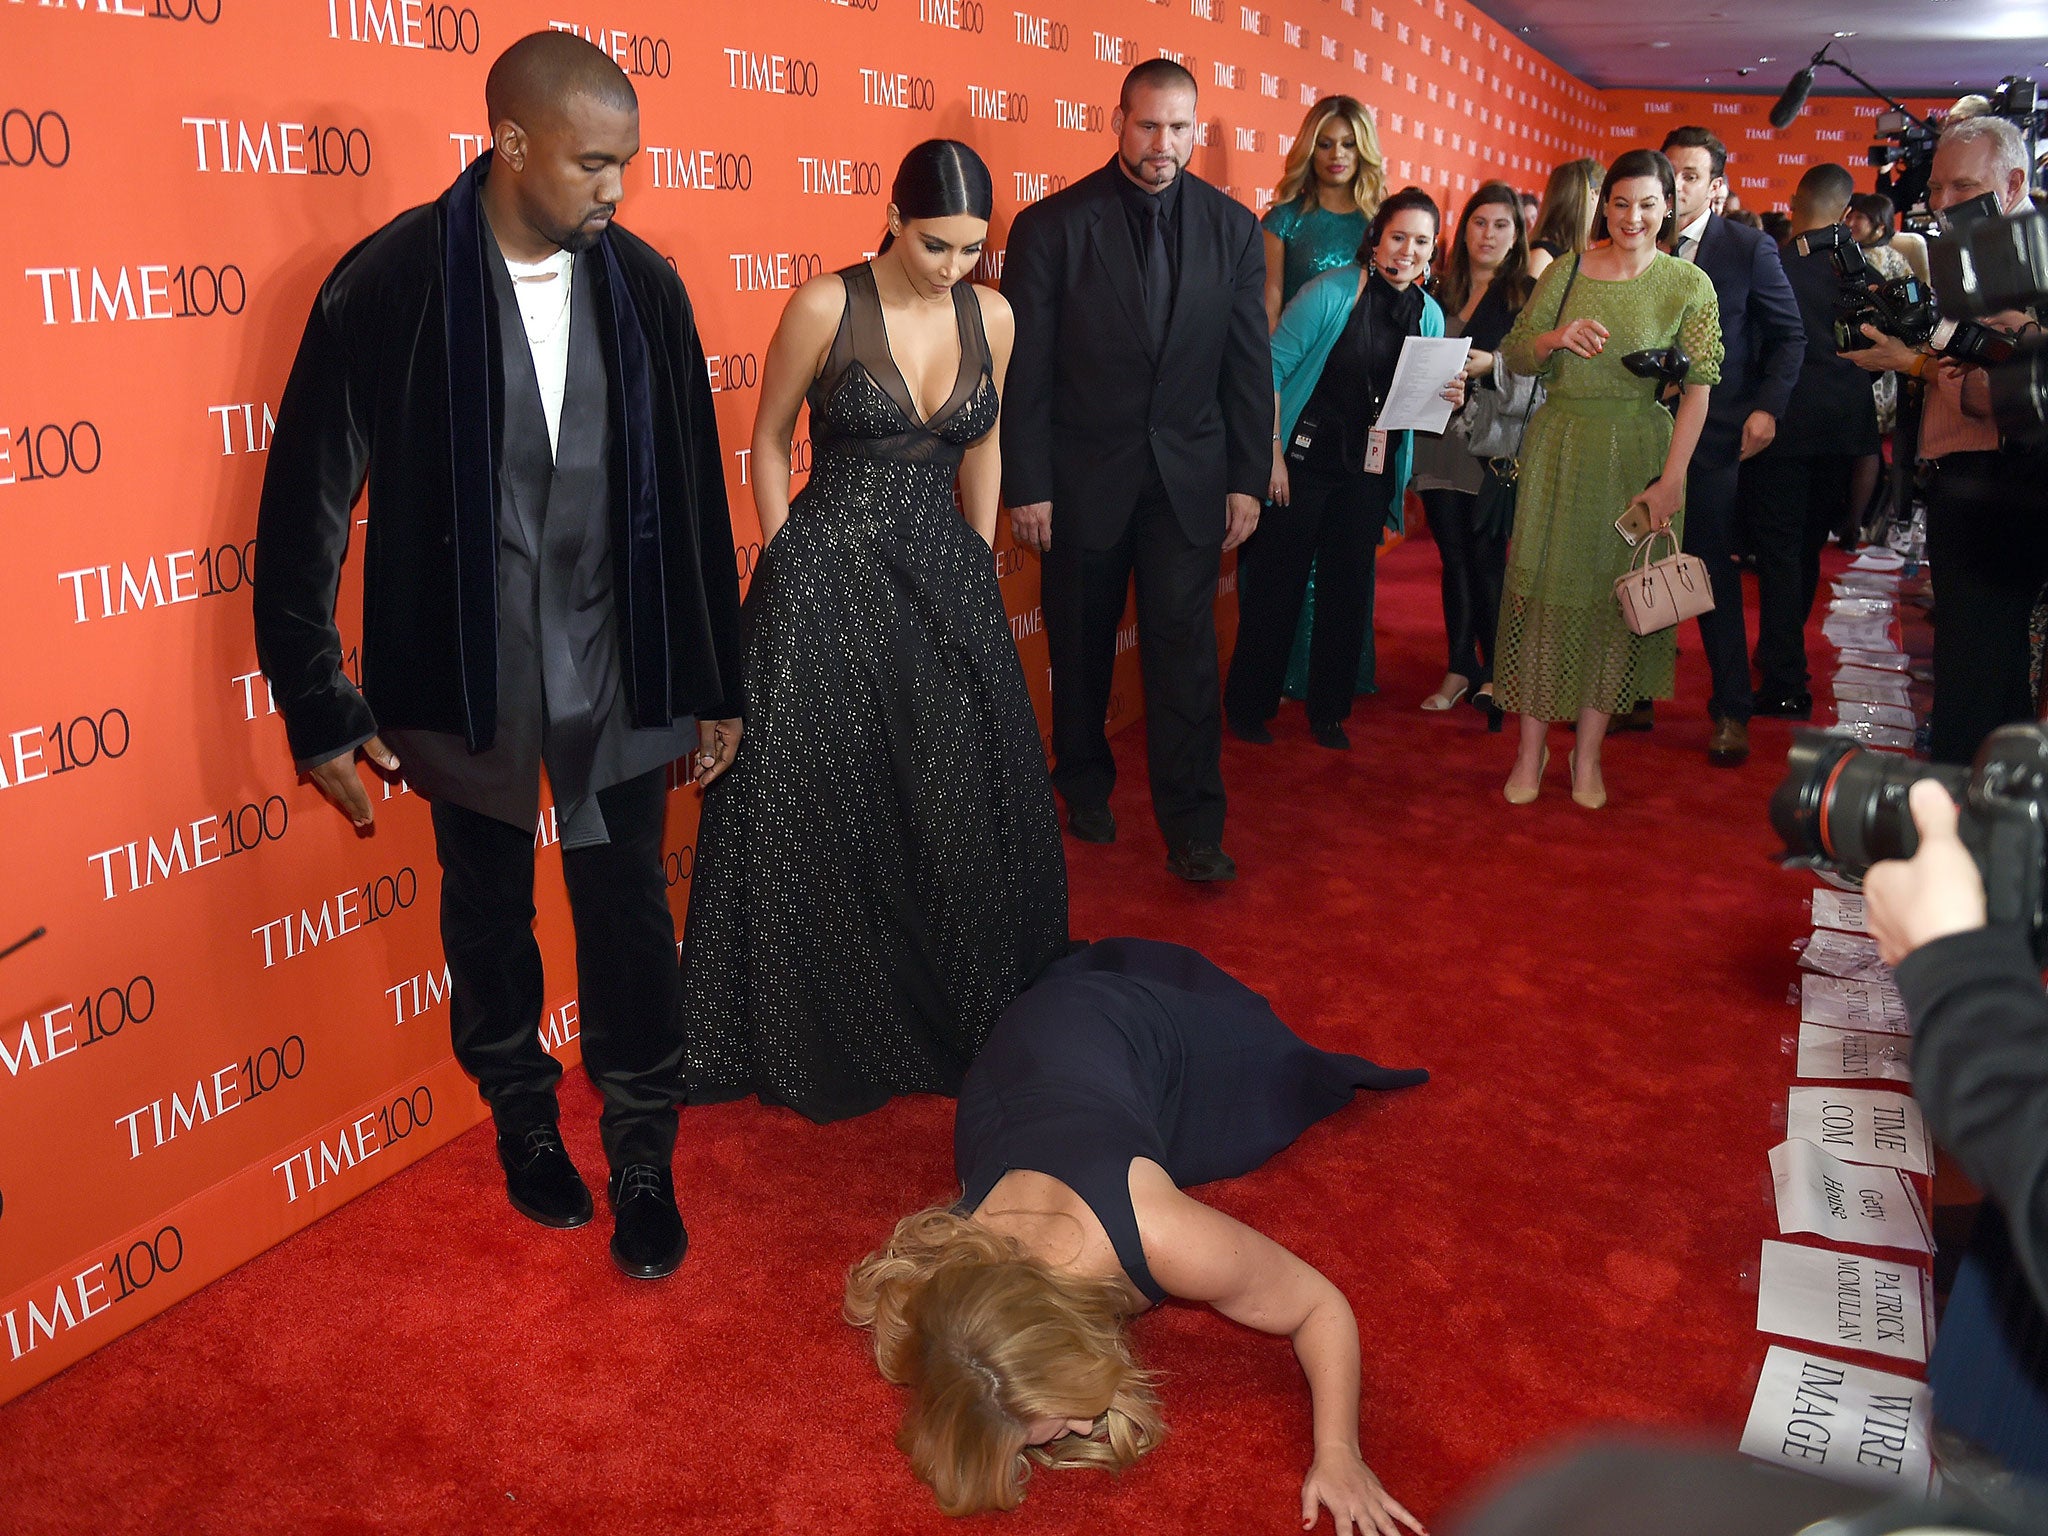 Honoree and Comedian Amy Schumer pretends to trip and fall on the floor in front of honorees Kim Kardashian and Kanye West as they attend the Time 100 Gala celebrating the Time 100 issue of the Most Influential People at The World at Jazz at Lincoln Cente